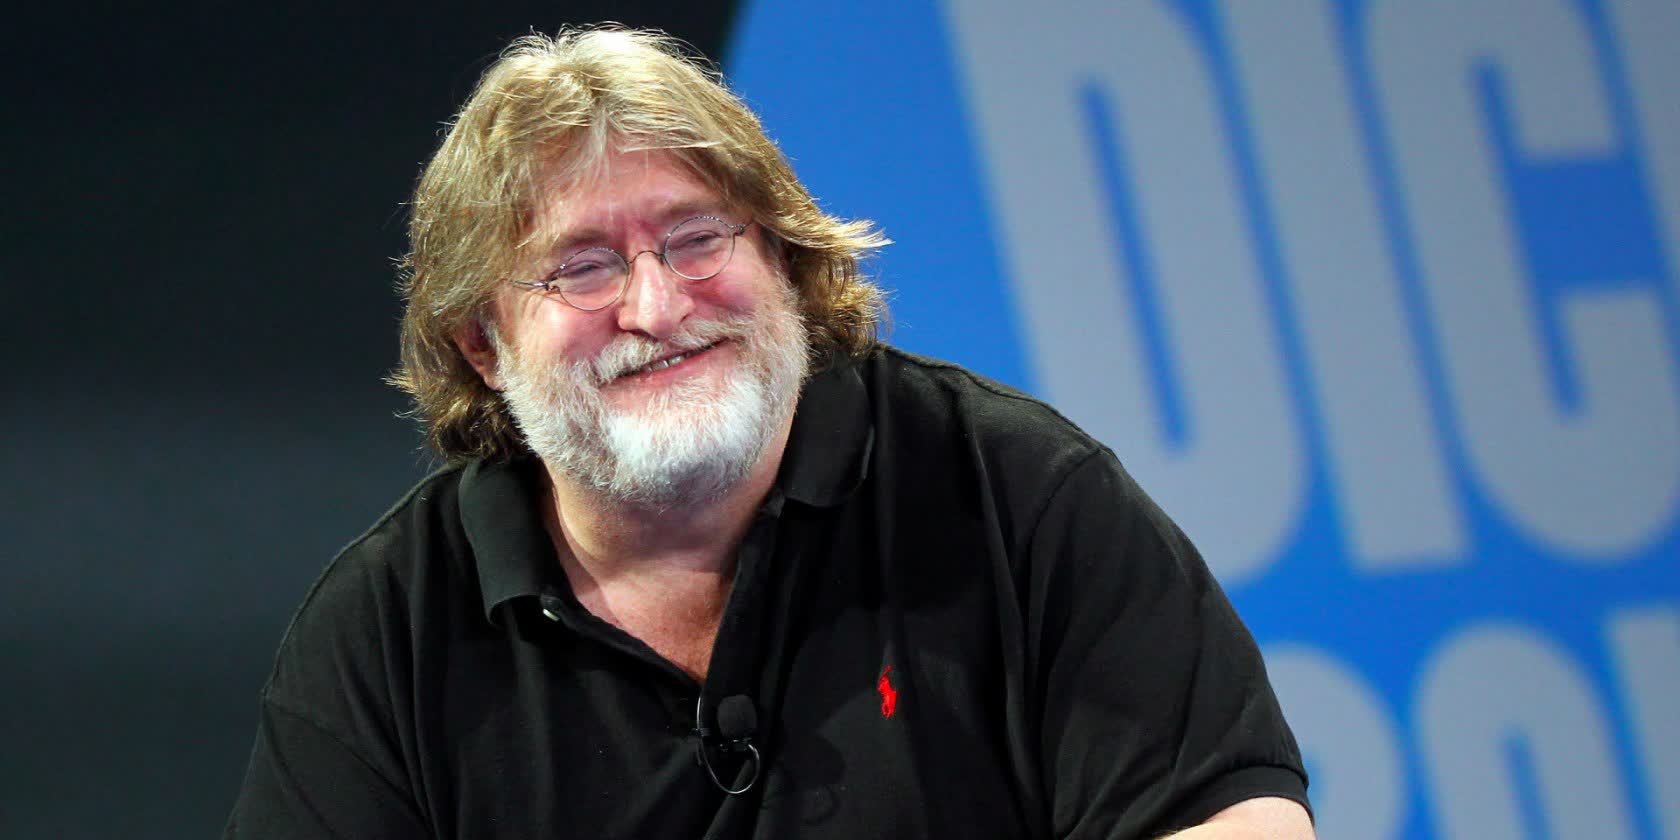 Gabe Newell says more Valve games are coming, gives verdict on Cyberpunk 2077